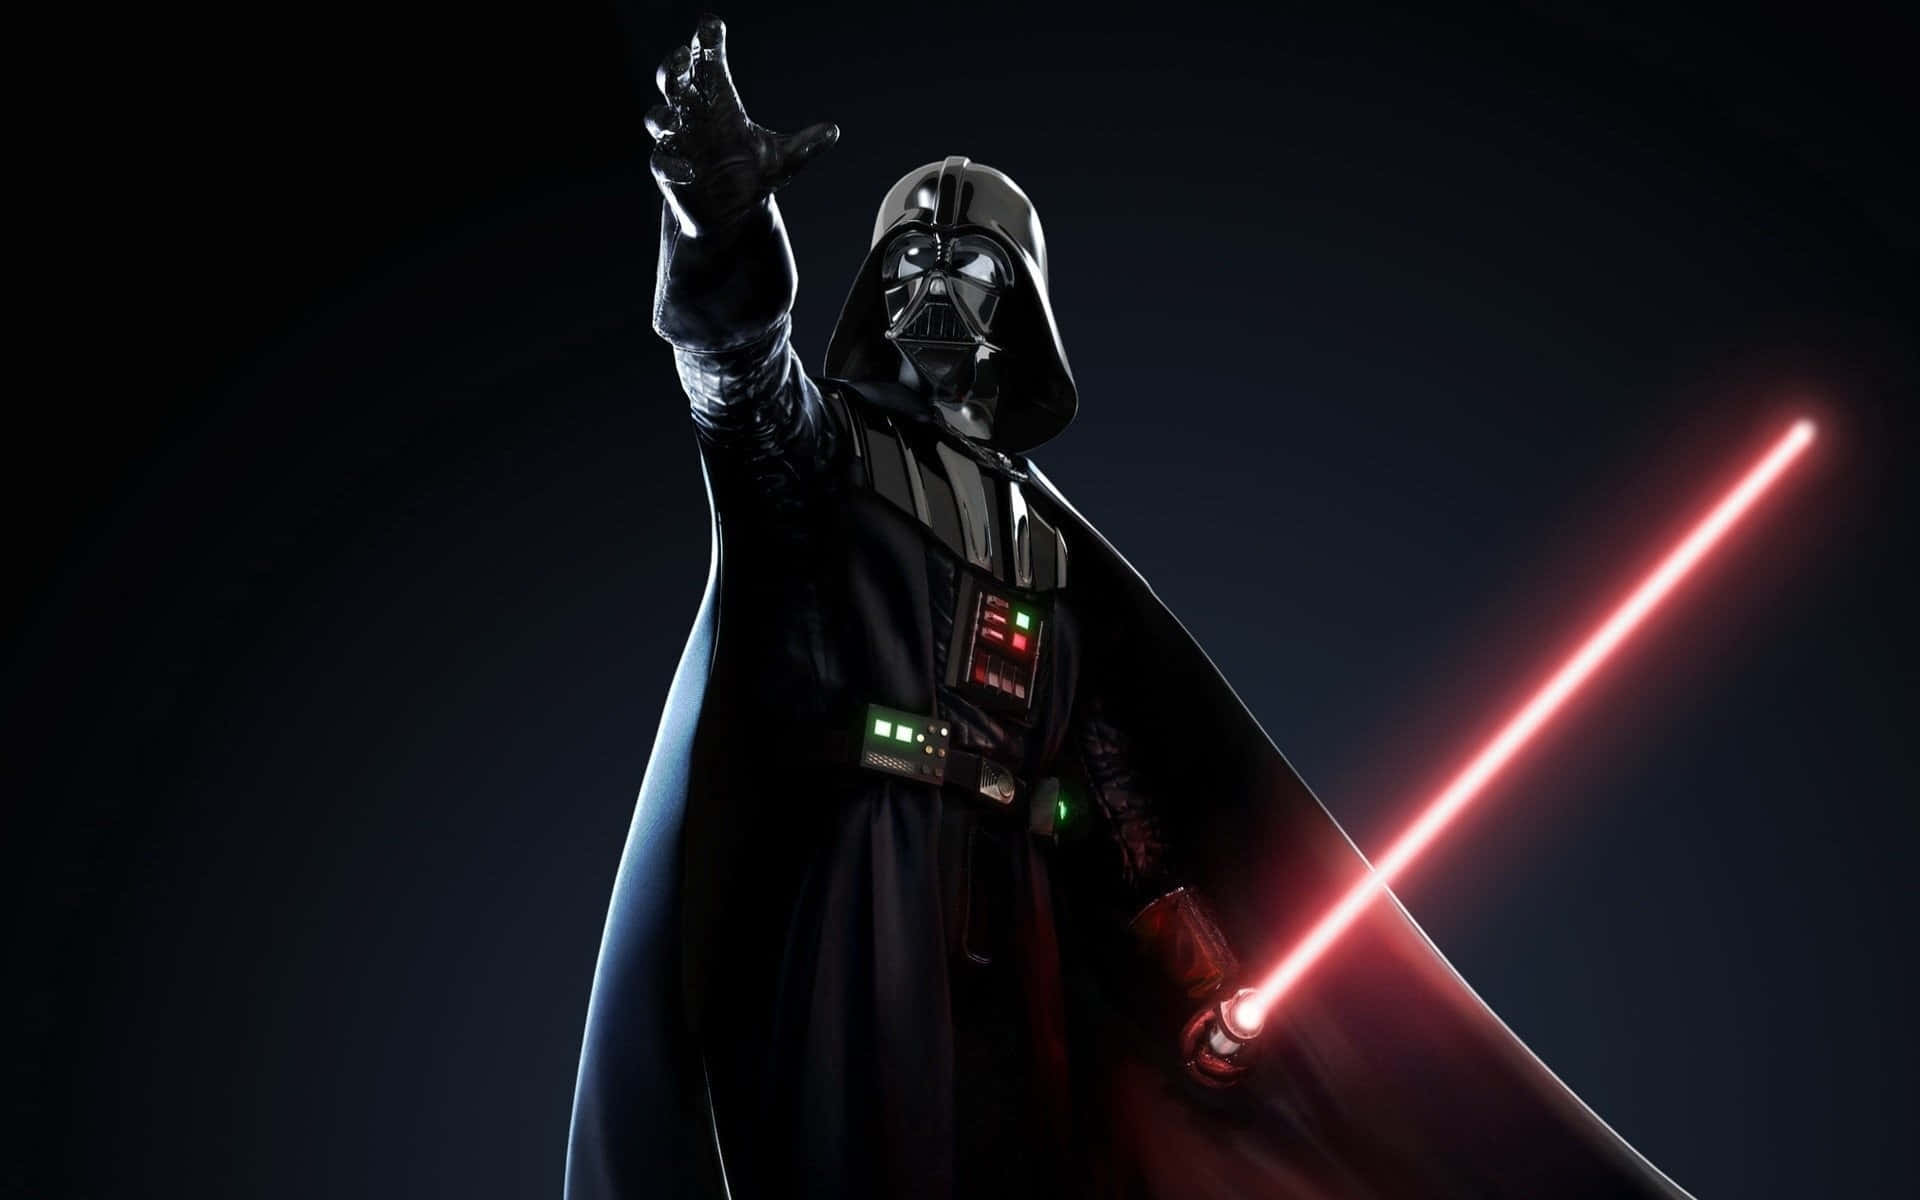 Darth Vader - Feared and Revered